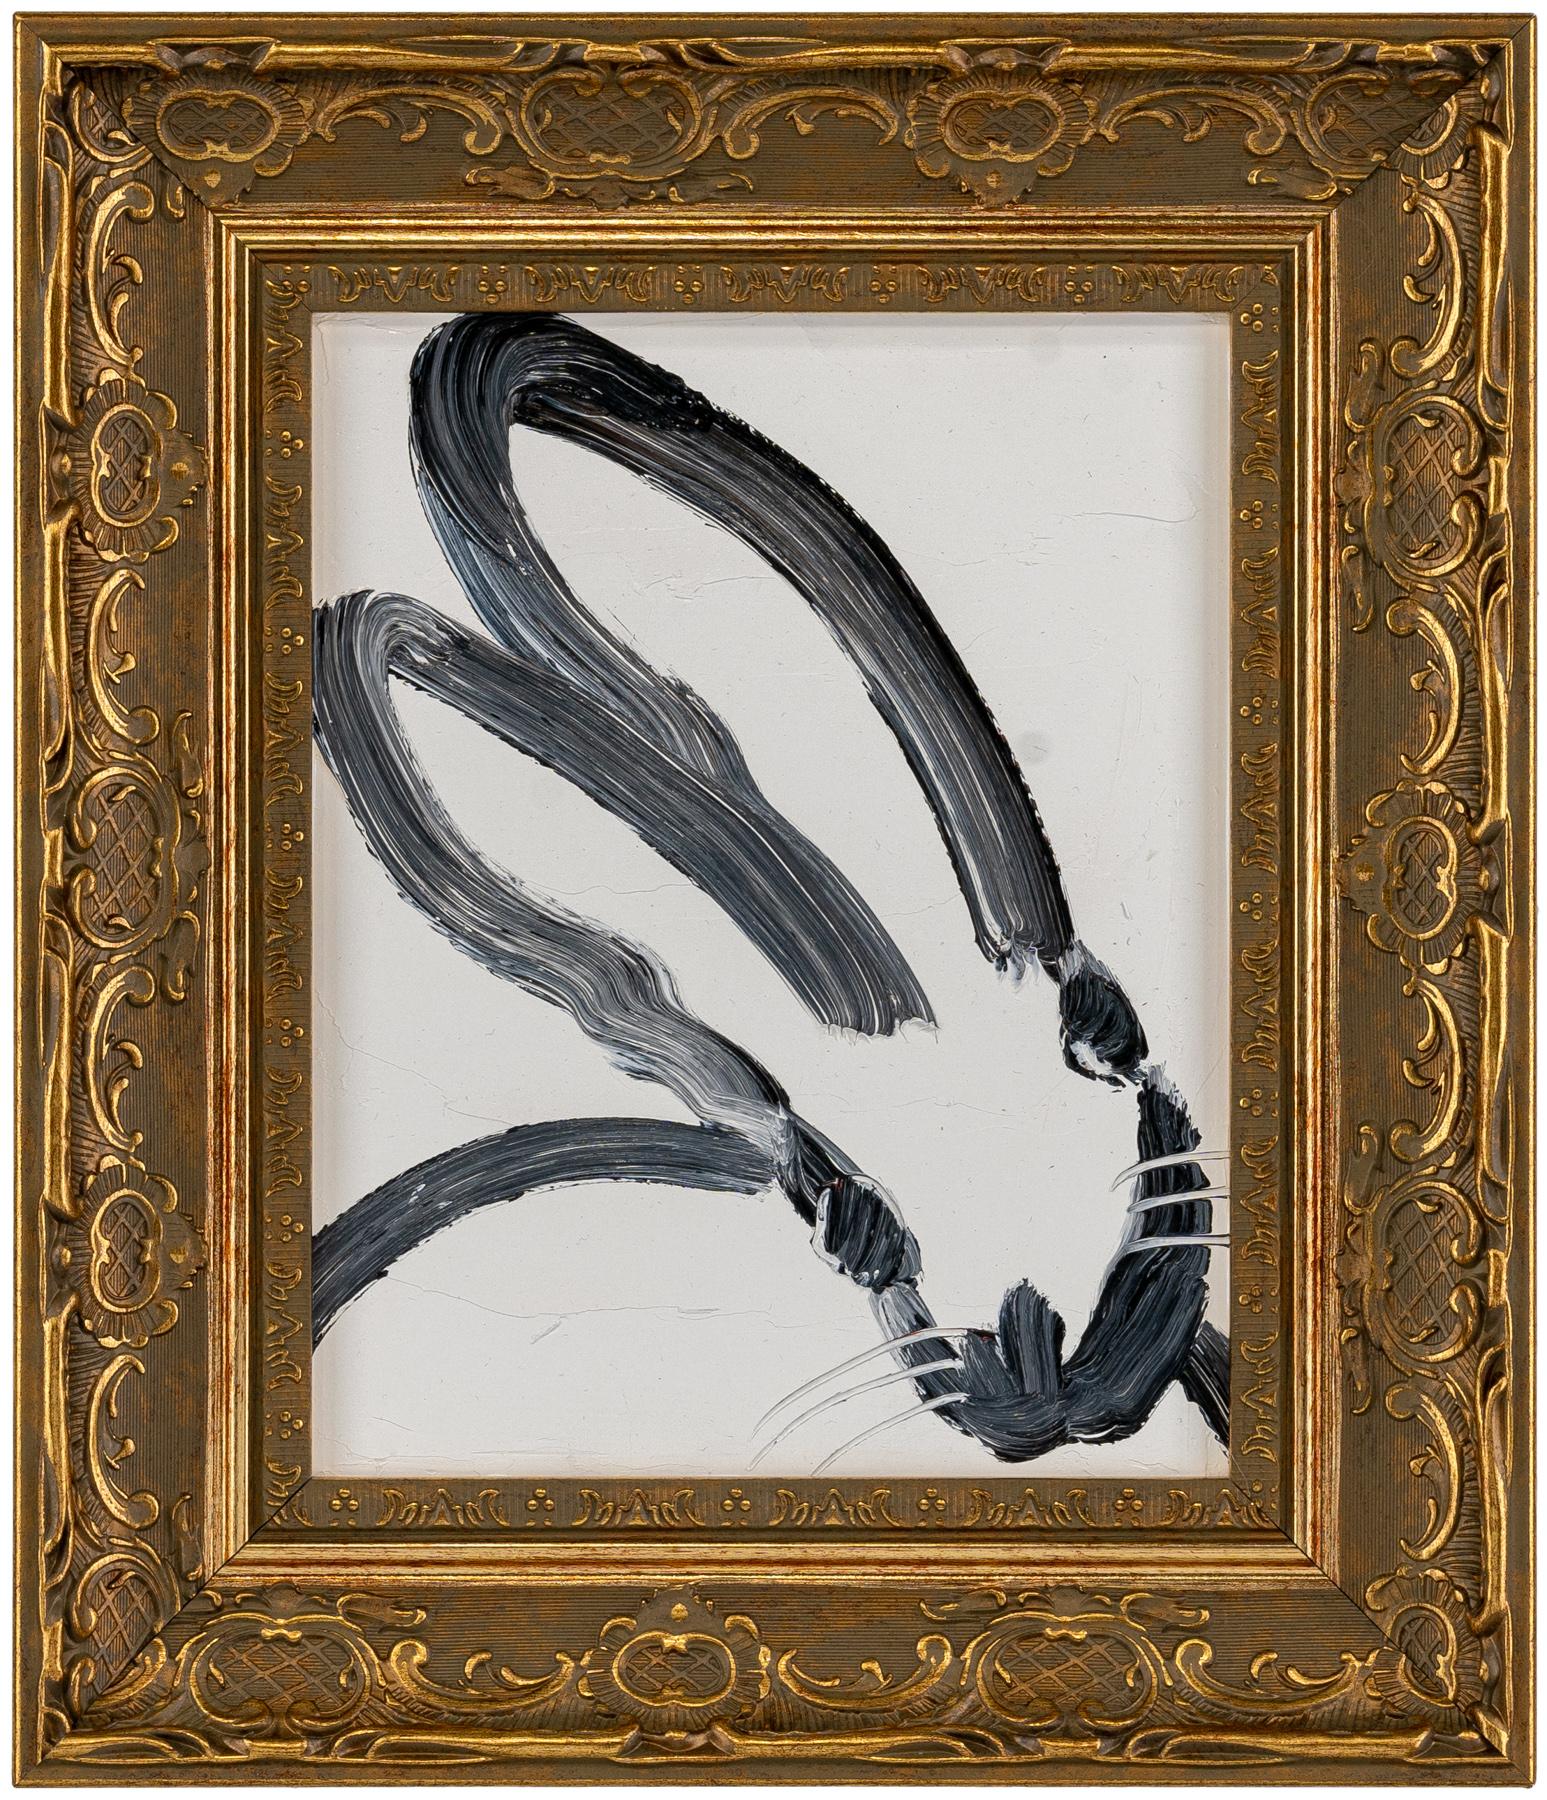 Available at Madelyn Jordon Fine Art. Hunt Slonem's bunny oil painting 'Winter' 2024. Oil on wood, 10 x 8 in. / Frame: 14.5 x 12.5 in. This painting features Slonem's signature bunny outlined in black over a white background. Framed in a